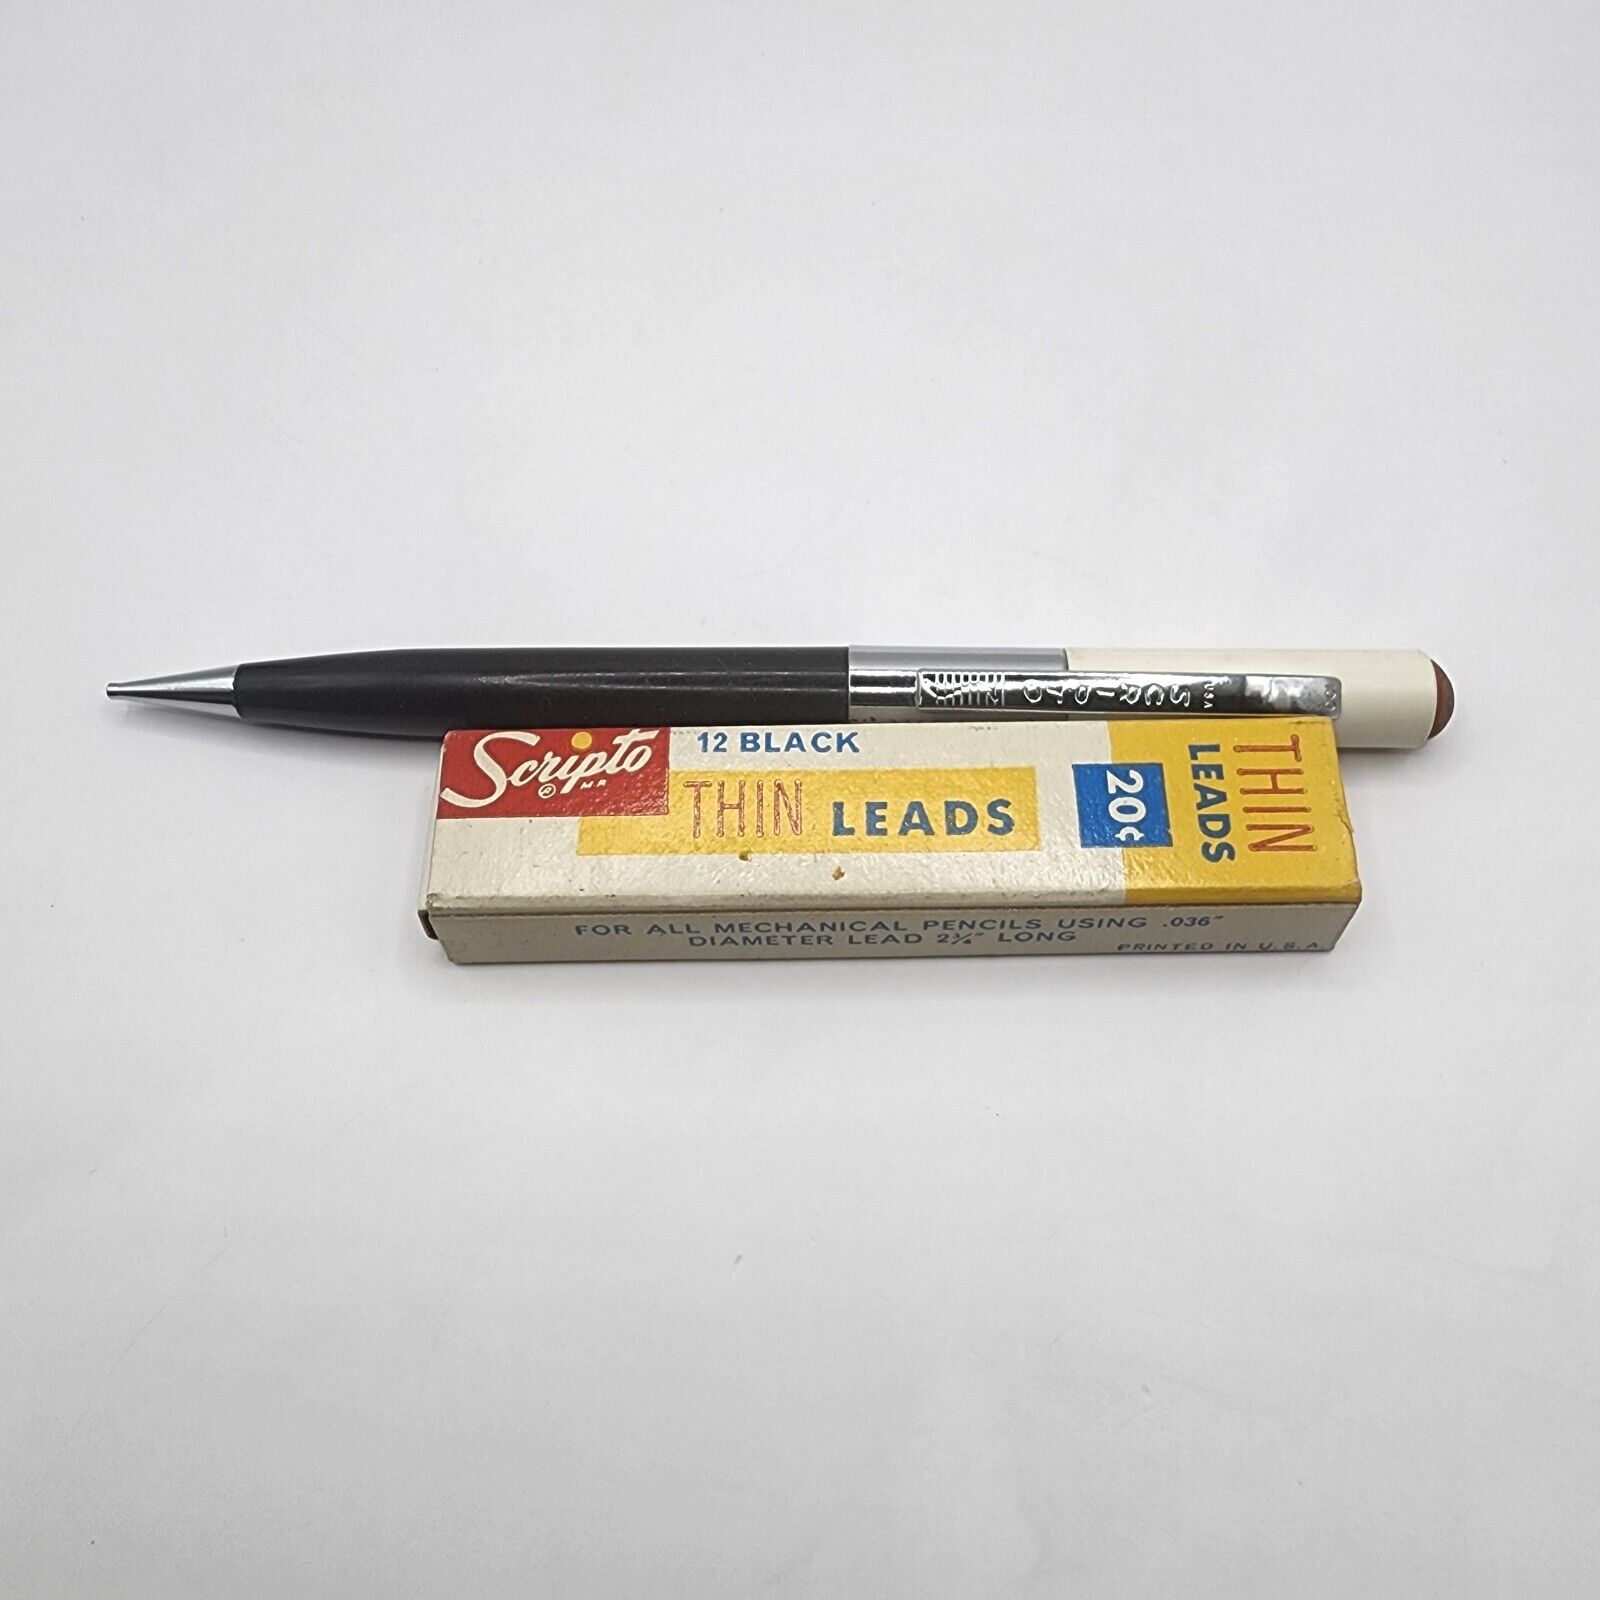 Vintage Scripto Mechanical Pencil With Lead 